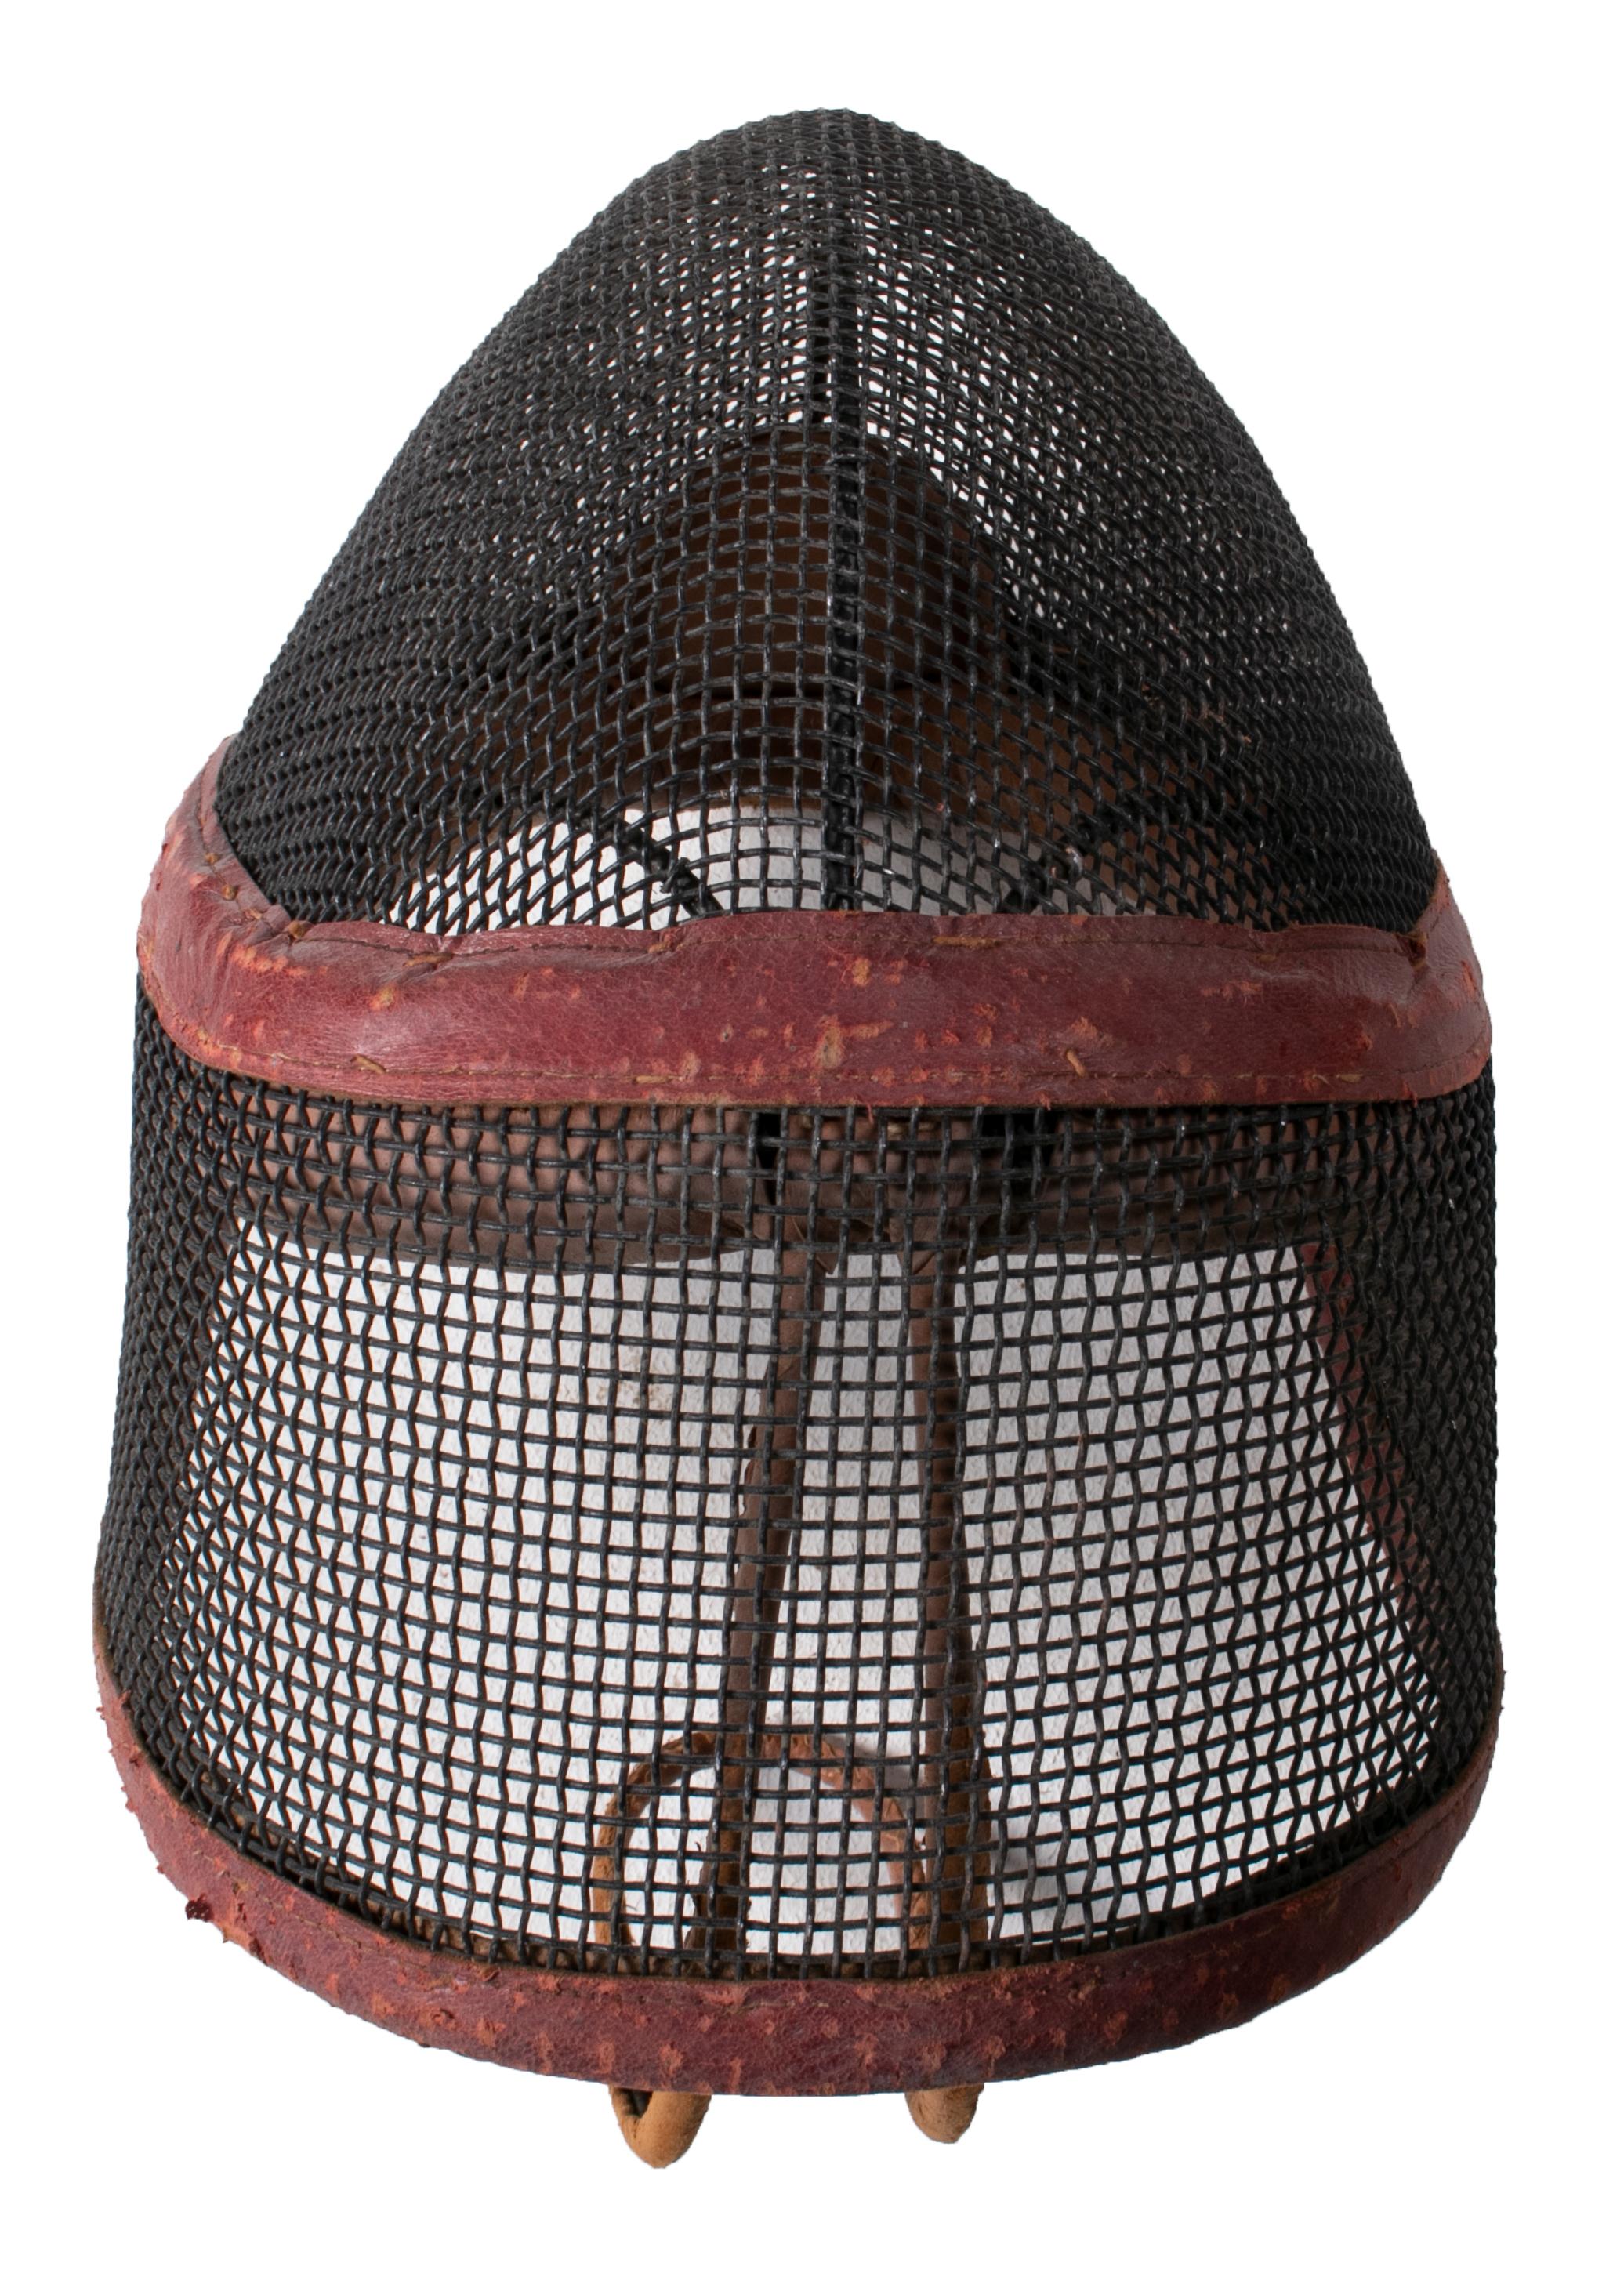 19th Century Pair of Antique Iron and Leather Fencing Mesh Mask 1